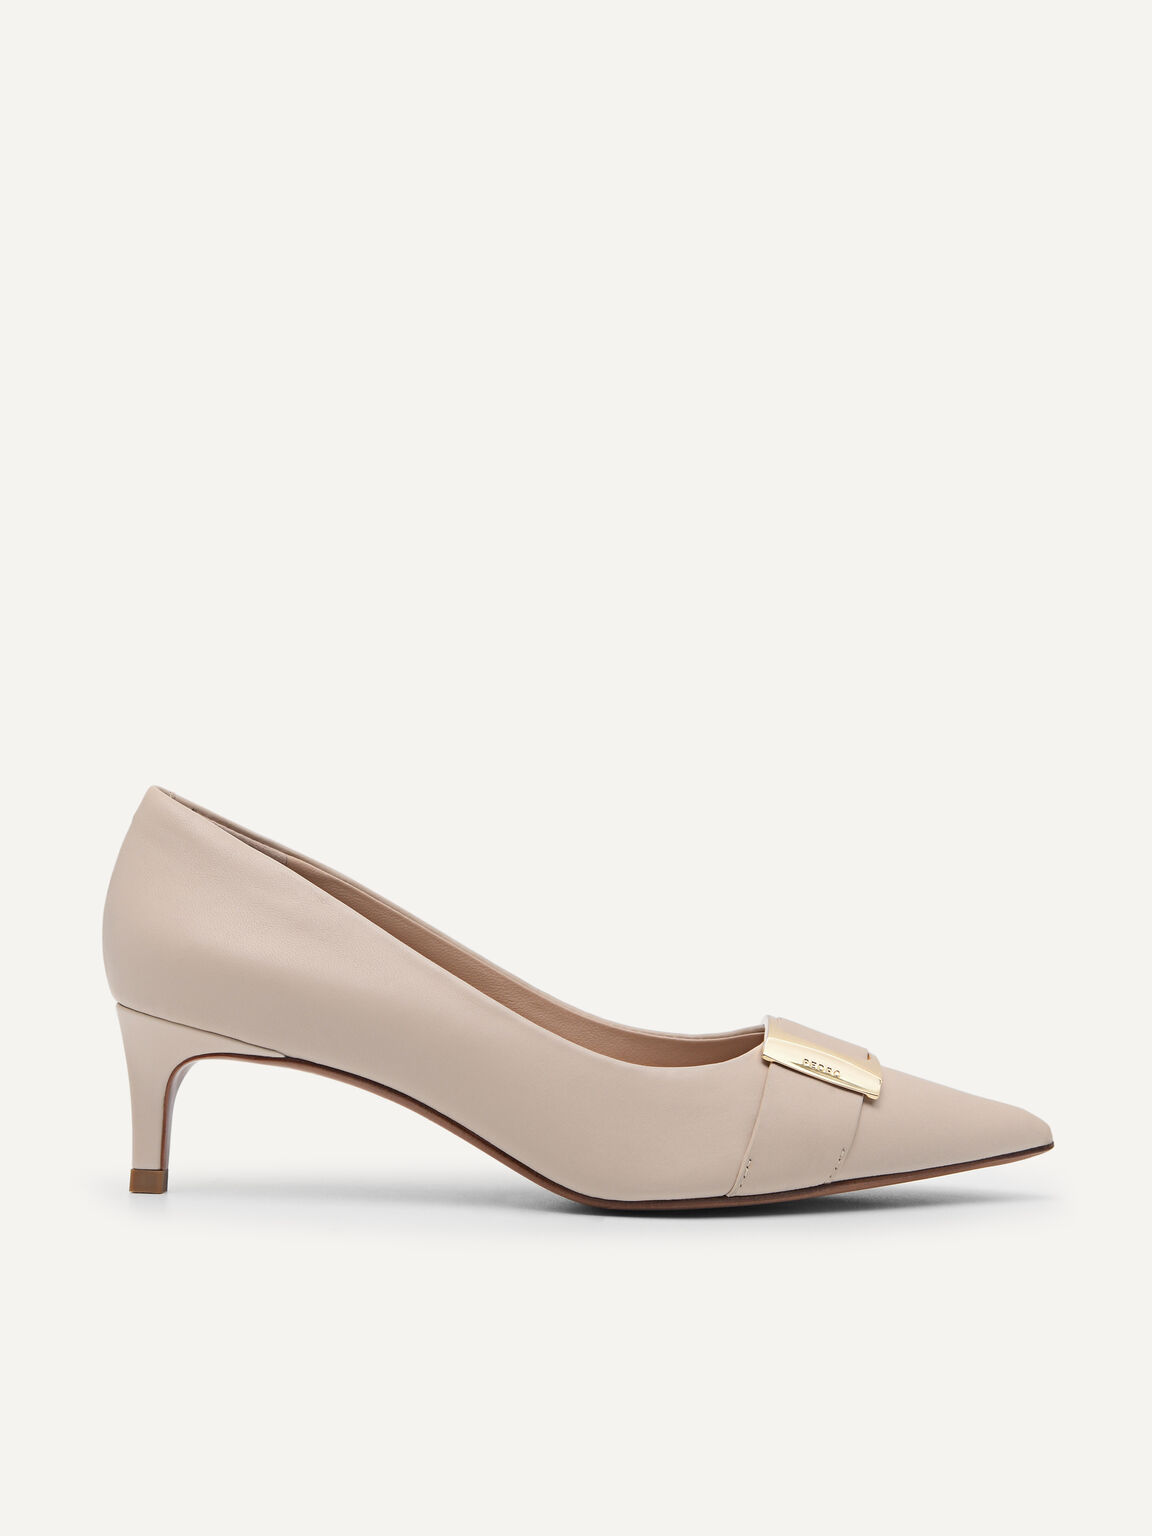 Leather Kitten Pumps, Nude, hi-res